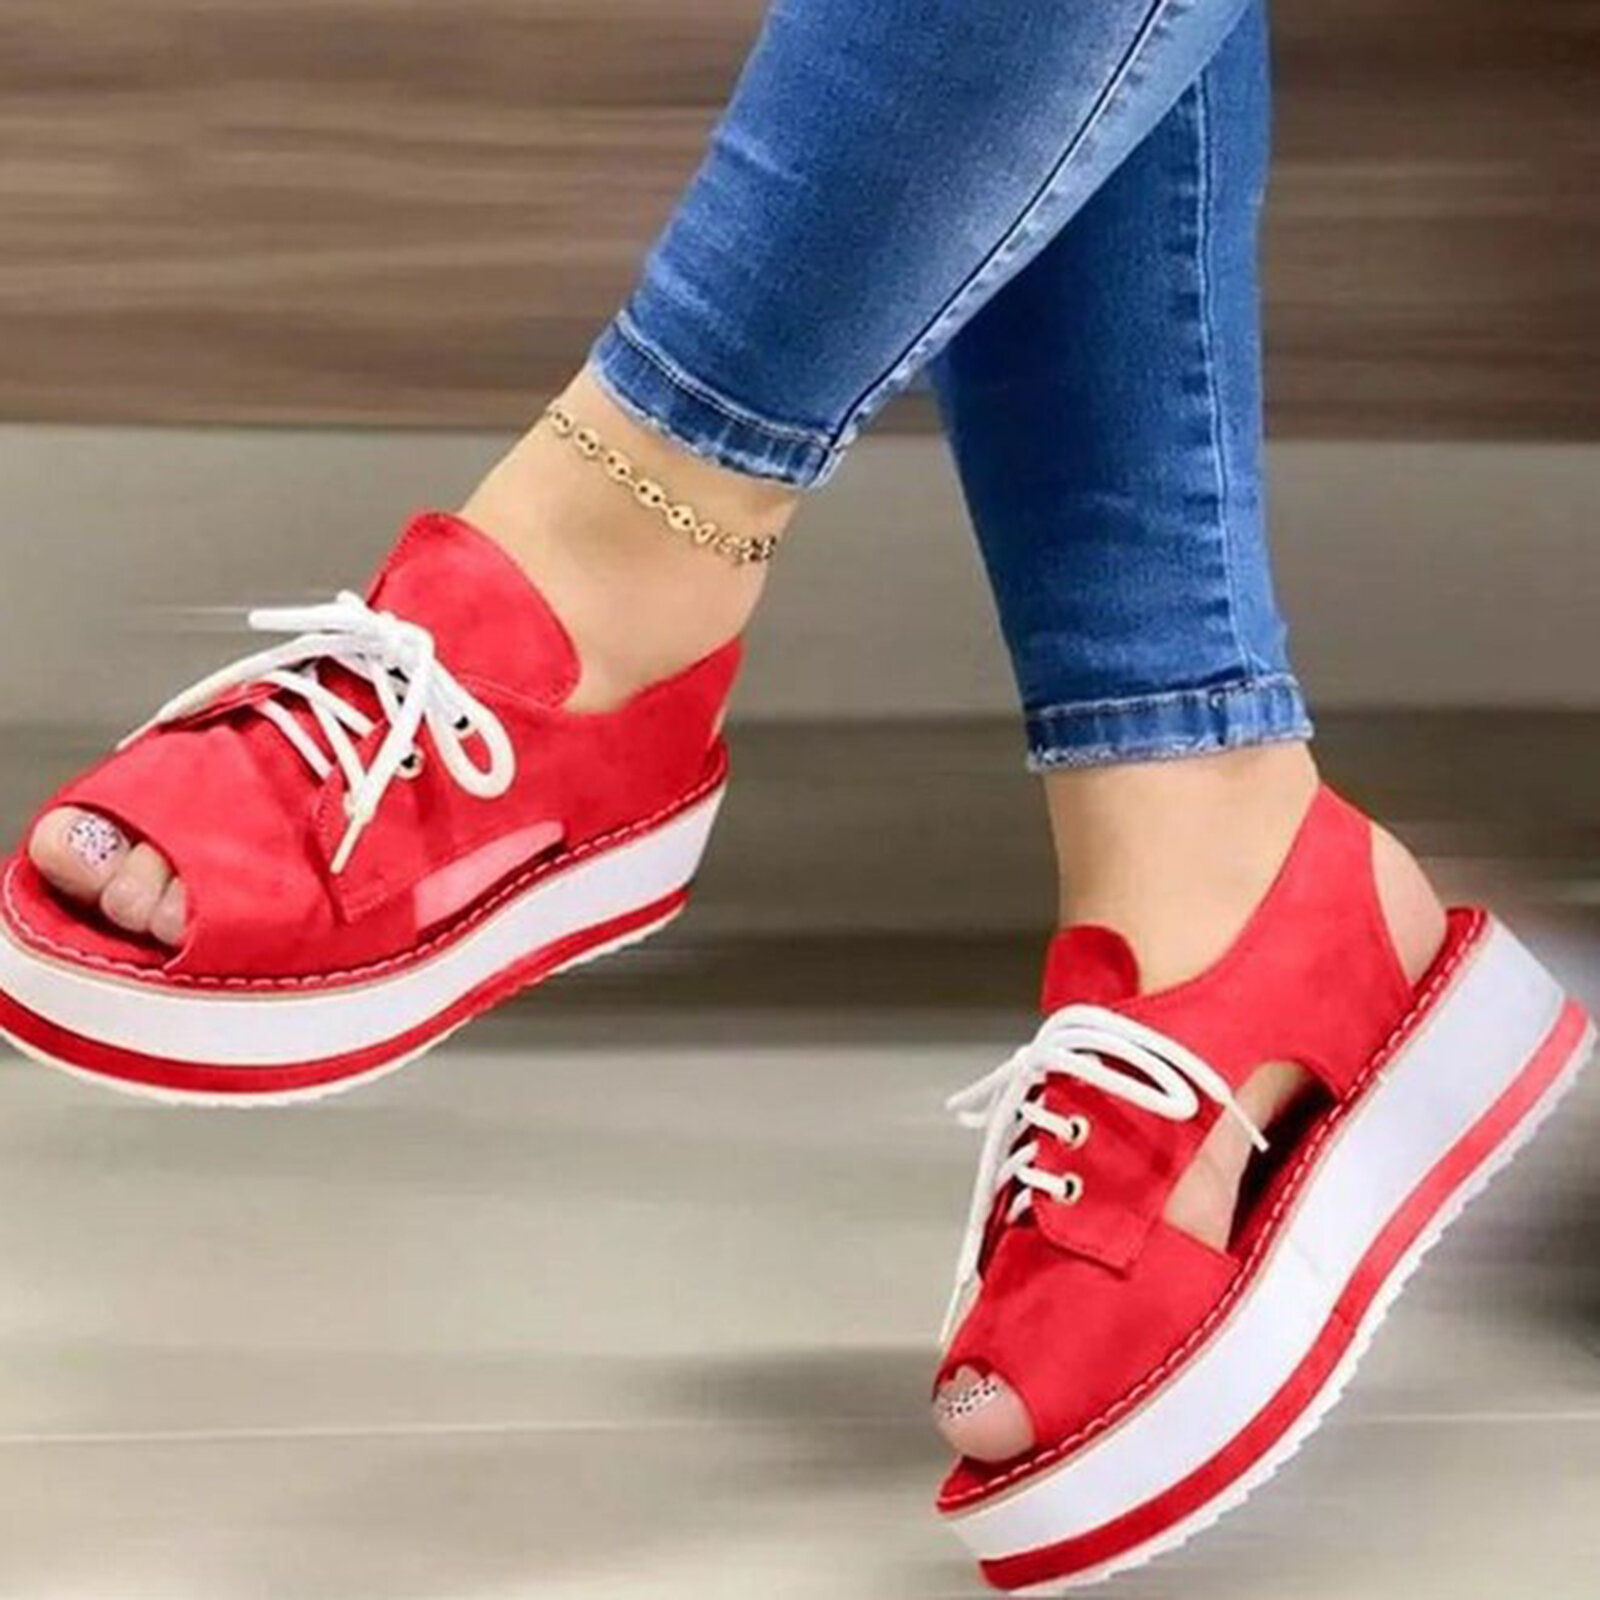 Large Size Summer Casual Platform Lace Up Canvas Sandals For Women